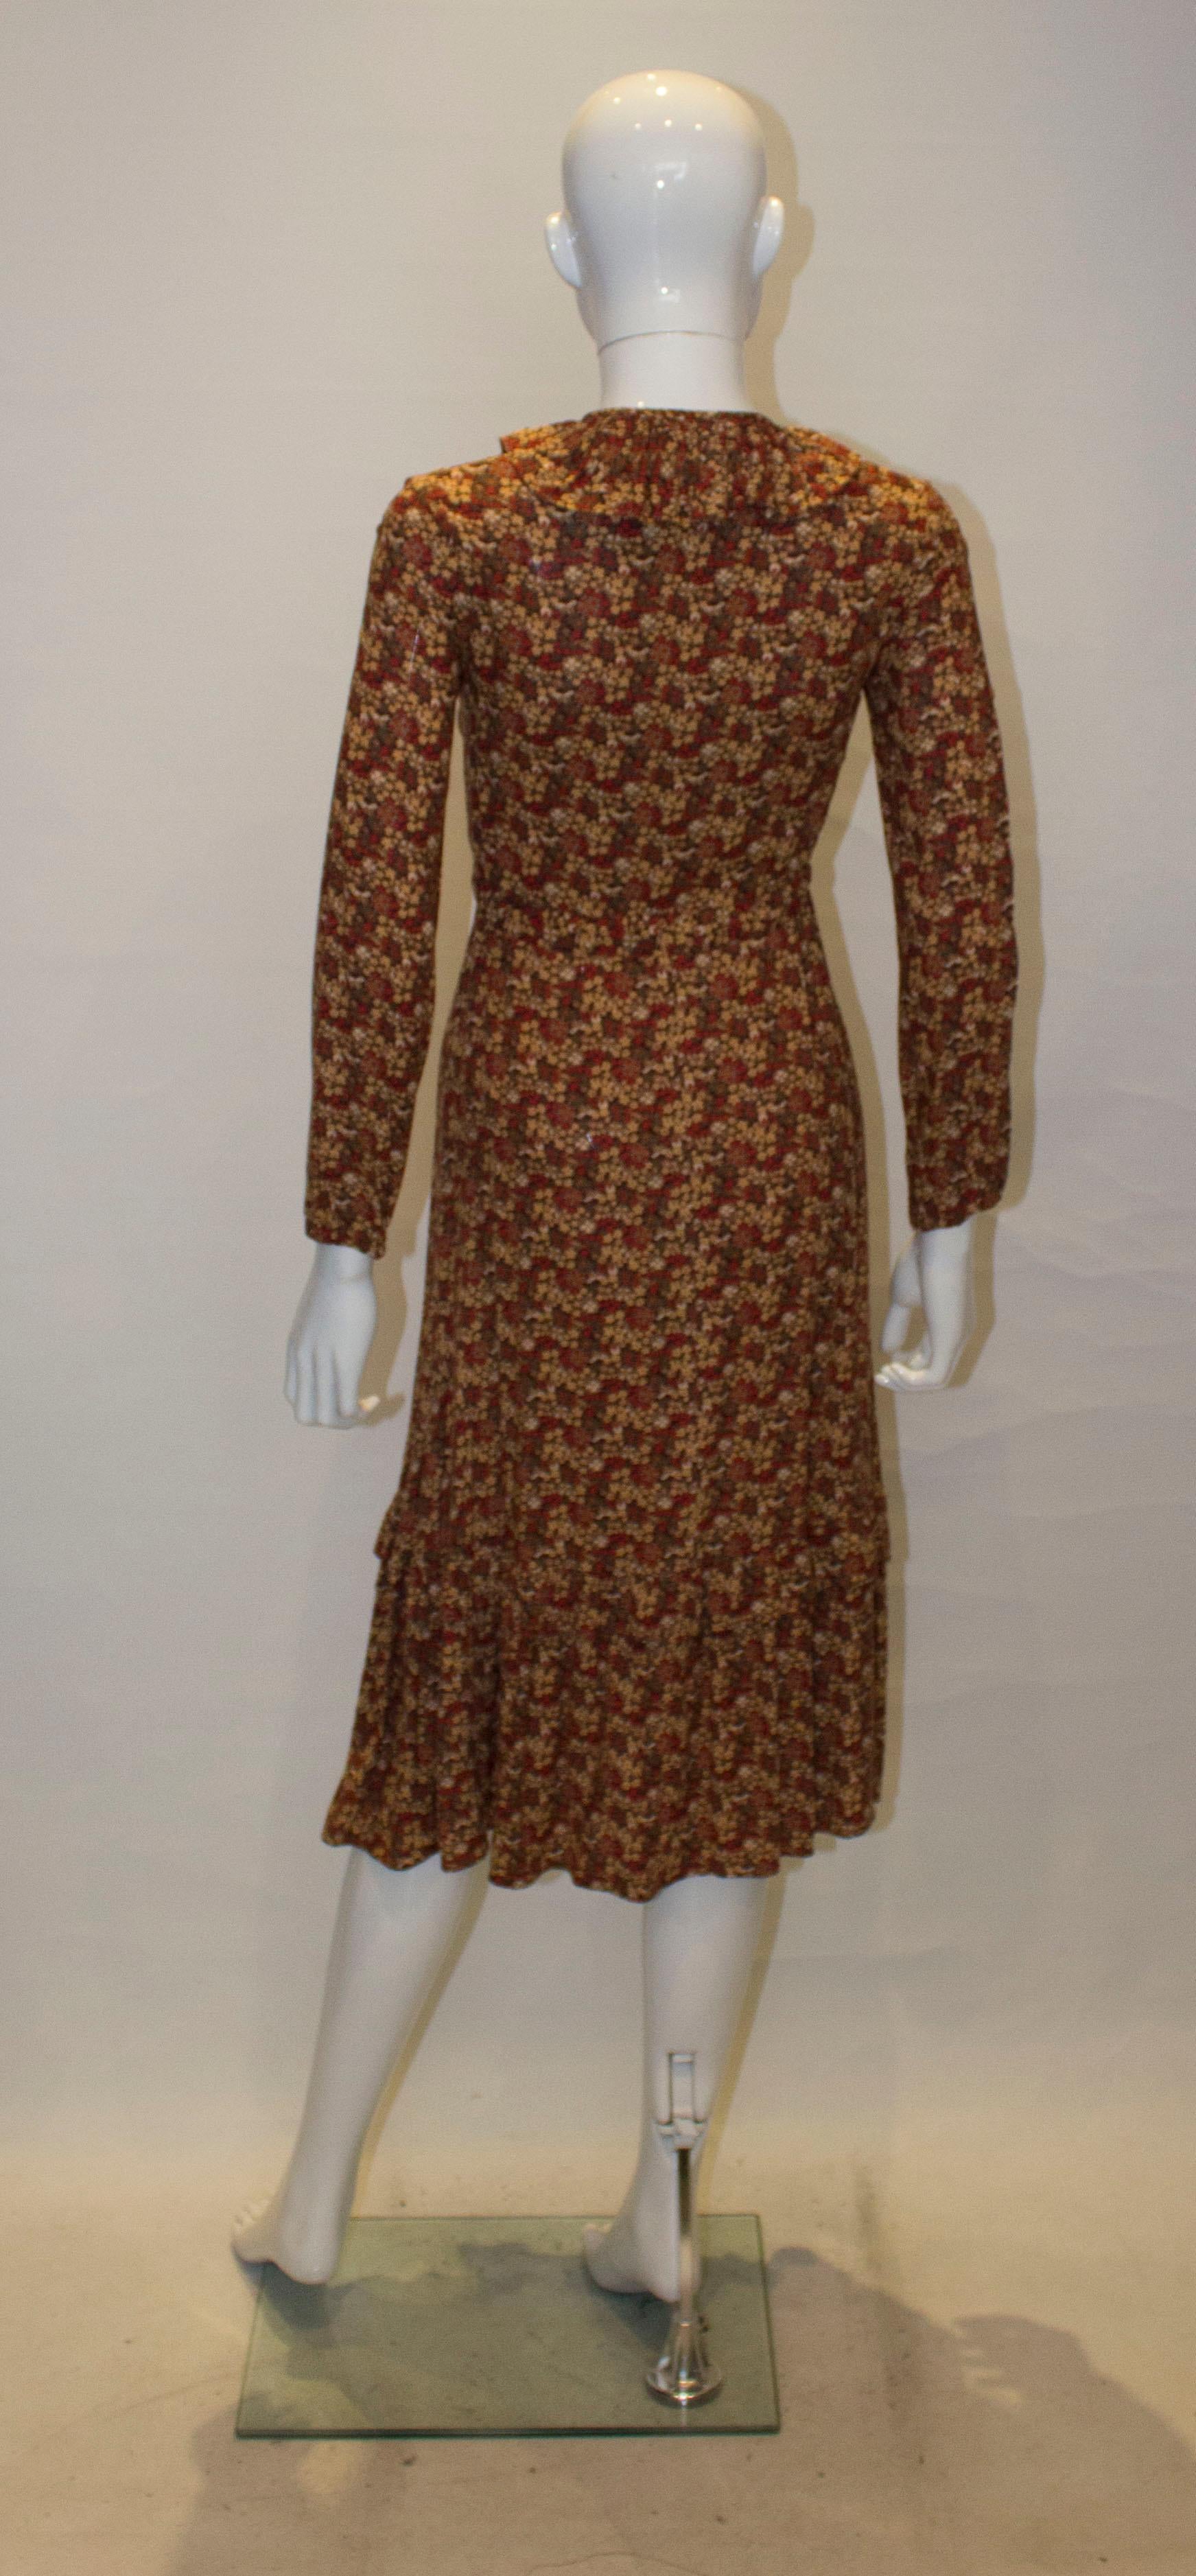 Vintage 1970s Floral Print Dress with Frill Collar For Sale 2